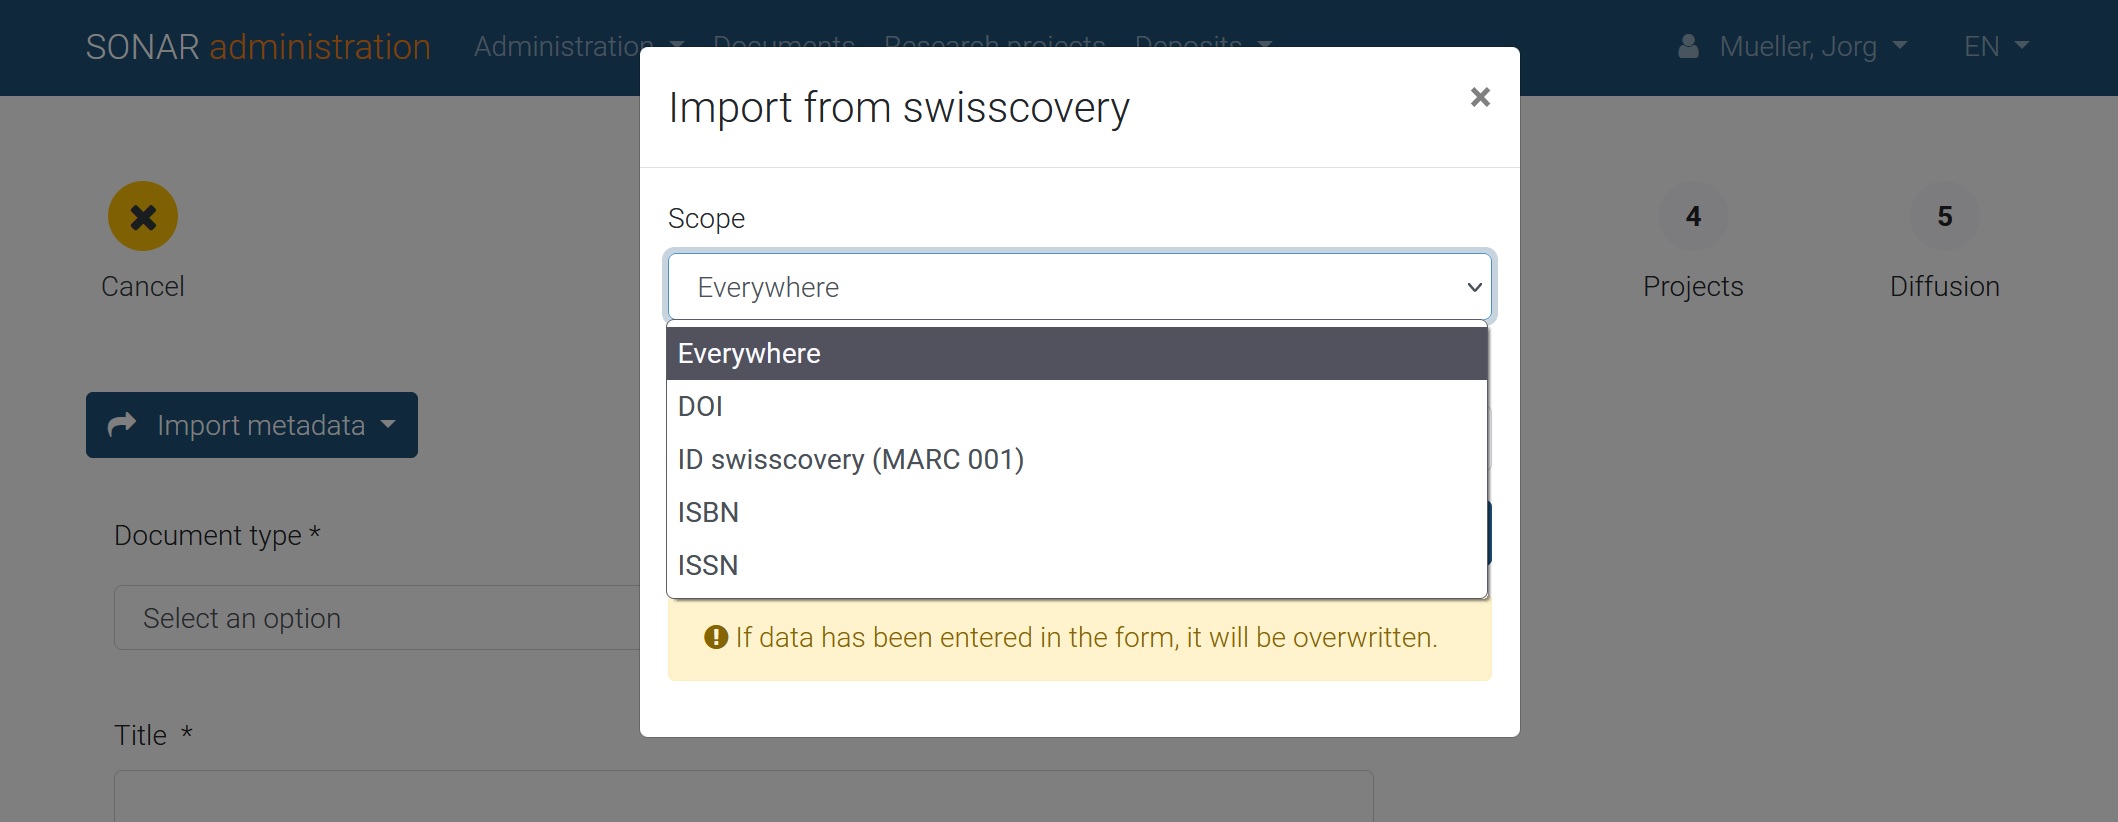 Import from swisscovery: various search options